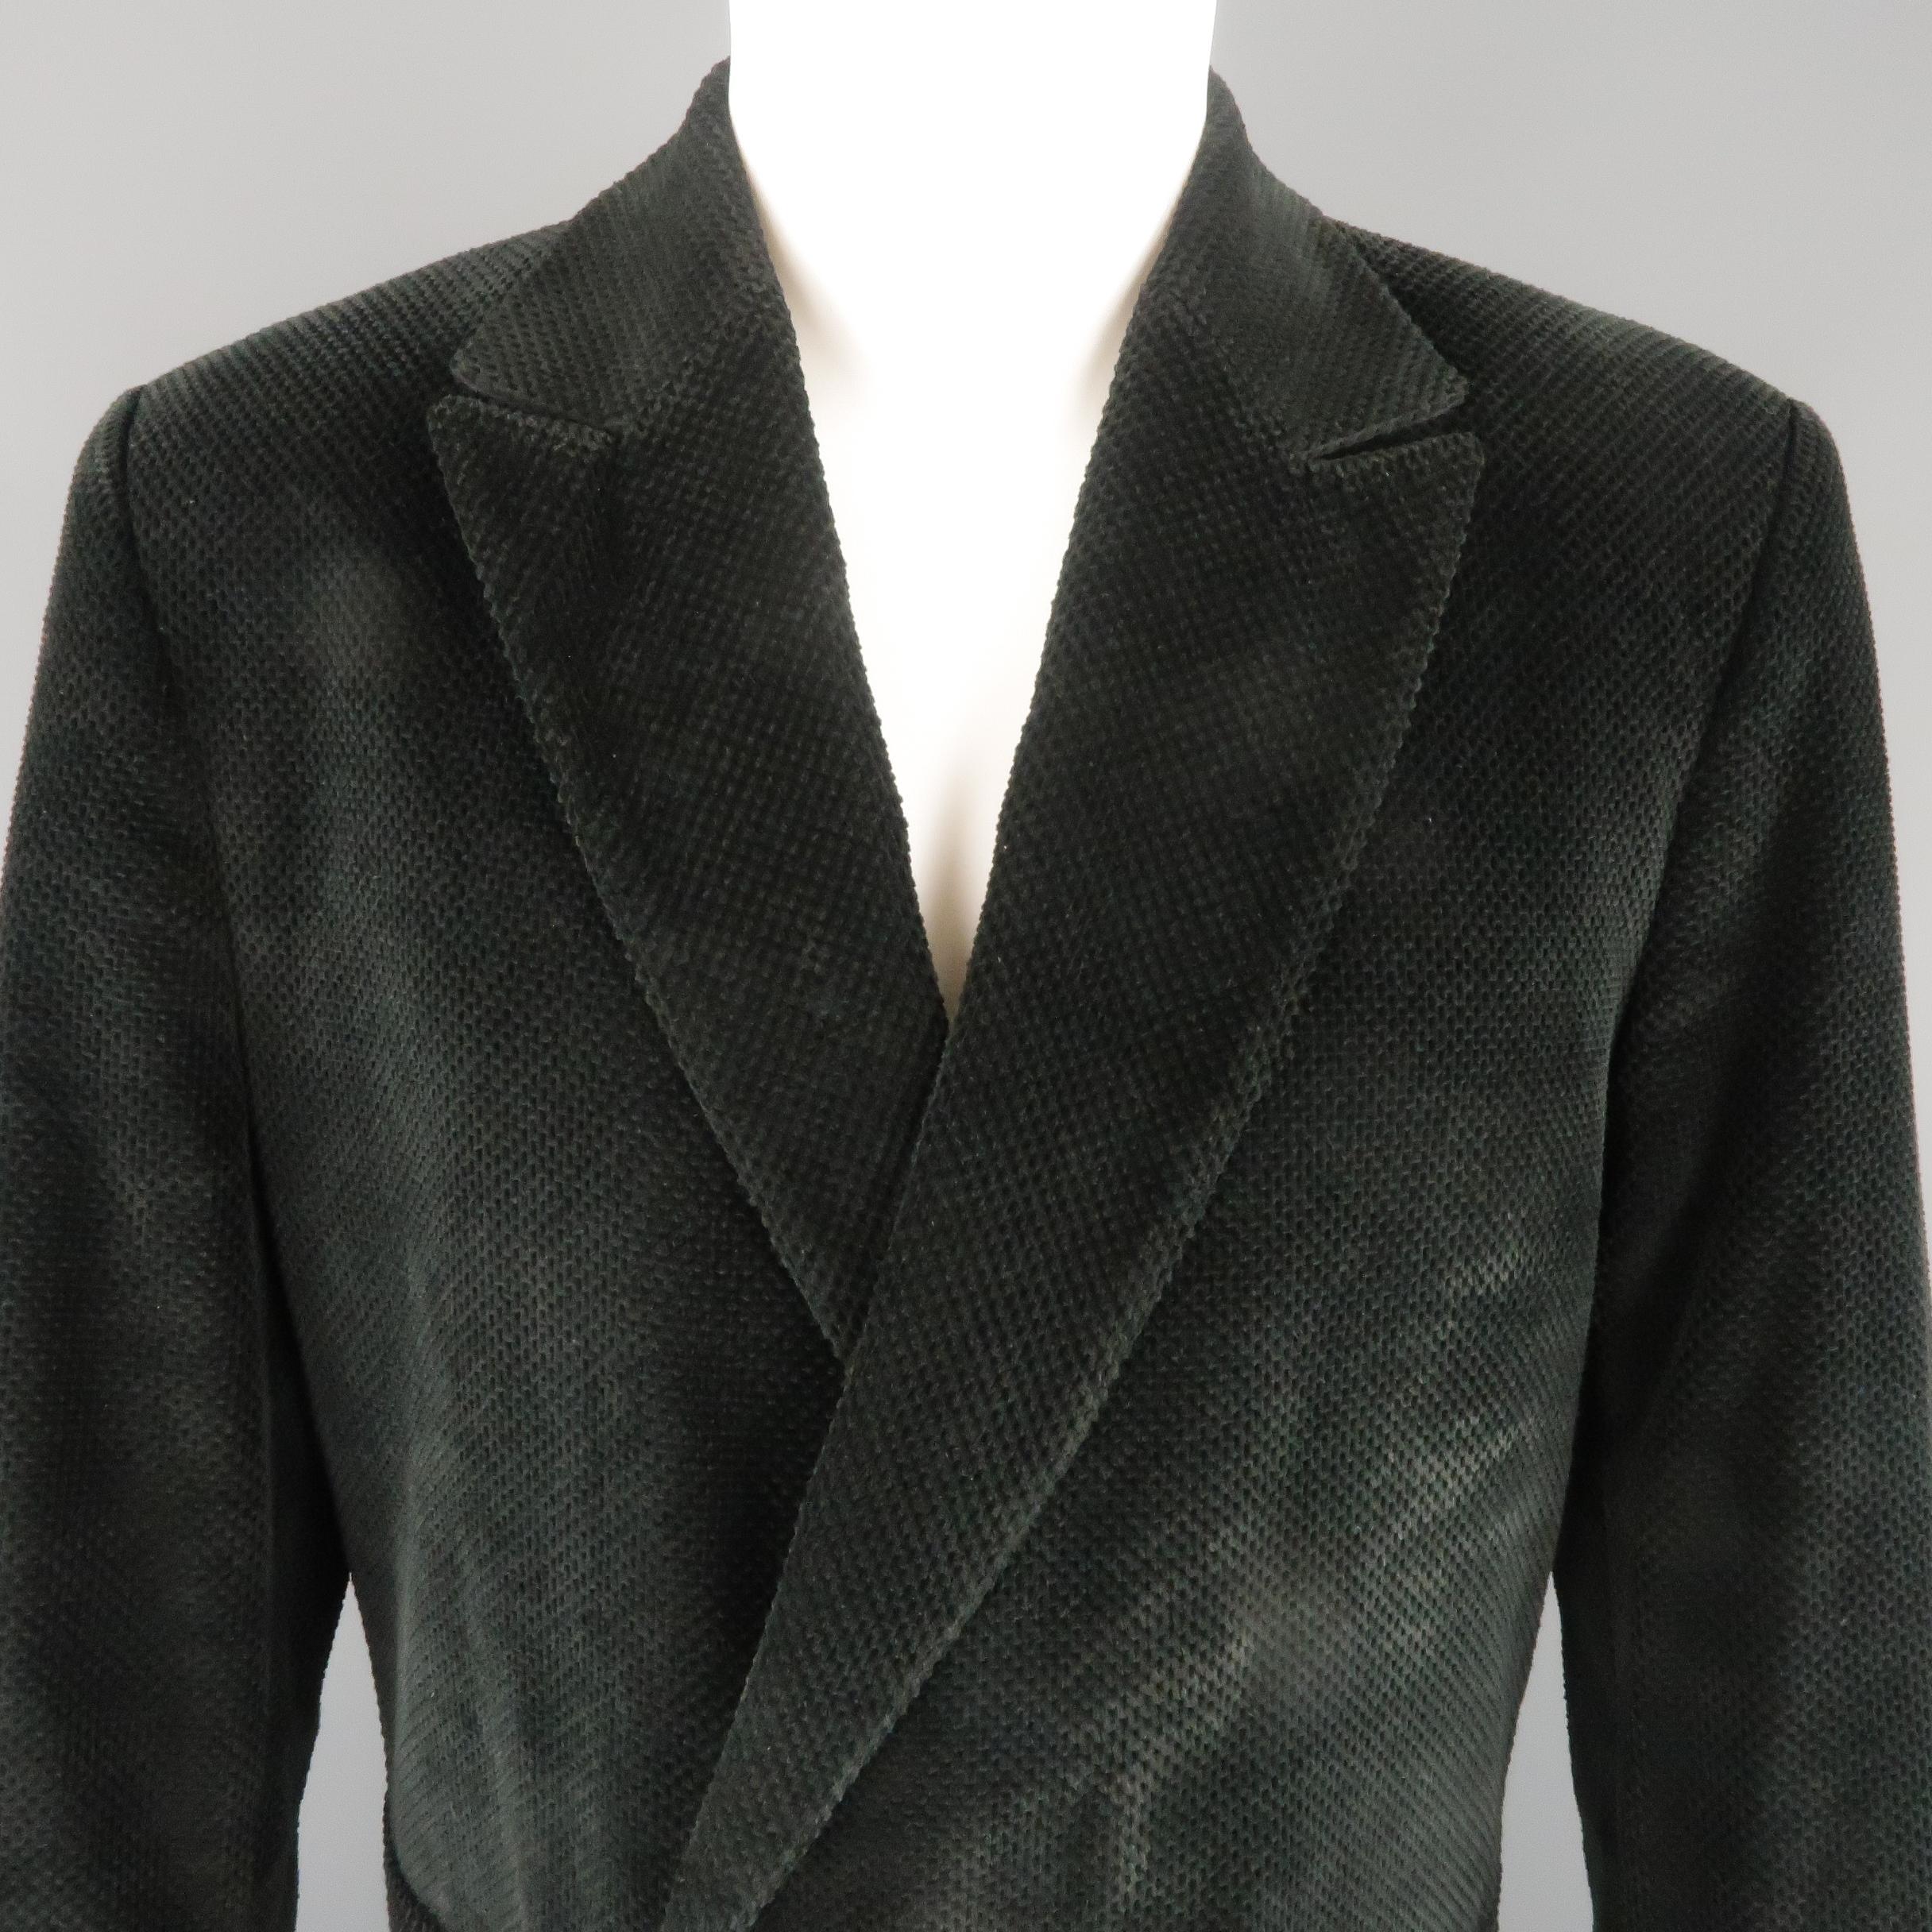 DOMINIQUE MORLOTTI coat comes in black nailhead textured velvet with a double breasted button front, peak lapel, and mock pockets. Made in France.
 
Very Good Pre-Owned Condition.
Marked: 41
 
Measurements:
 
Shoulder: 18 in.
Chest: 46 in.
Sleeve: